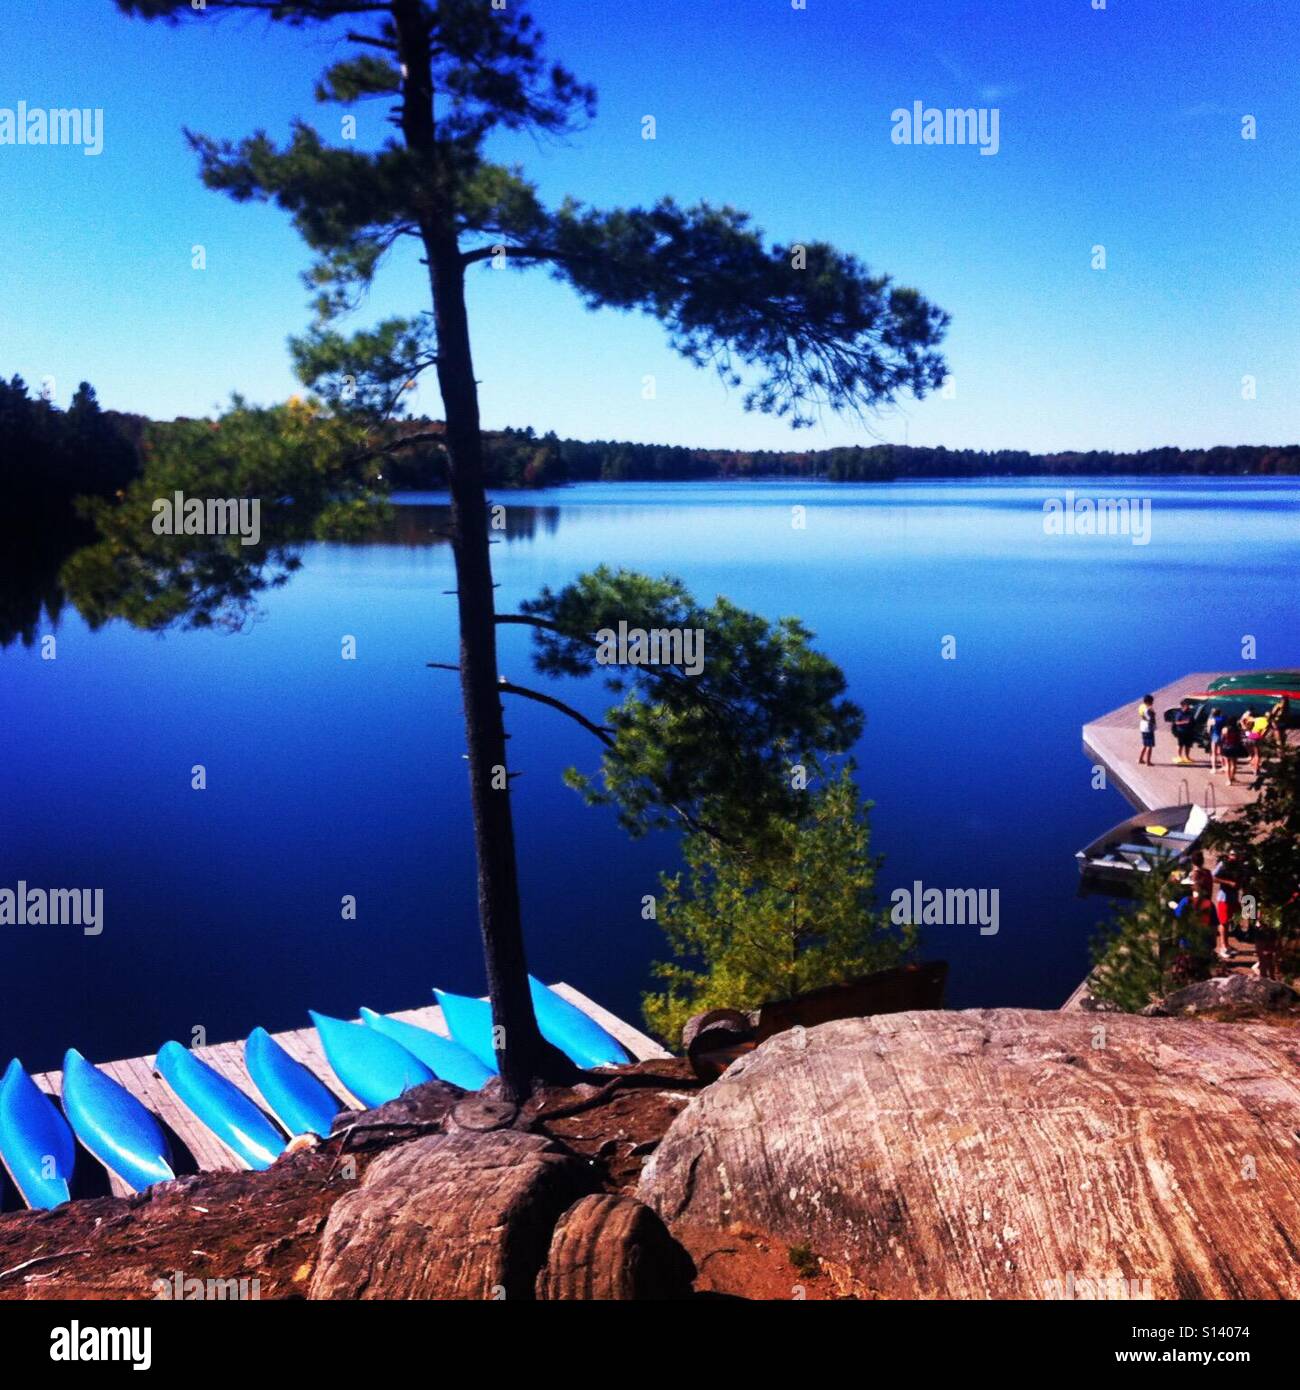 Summer lake with blue canoes Stock Photo